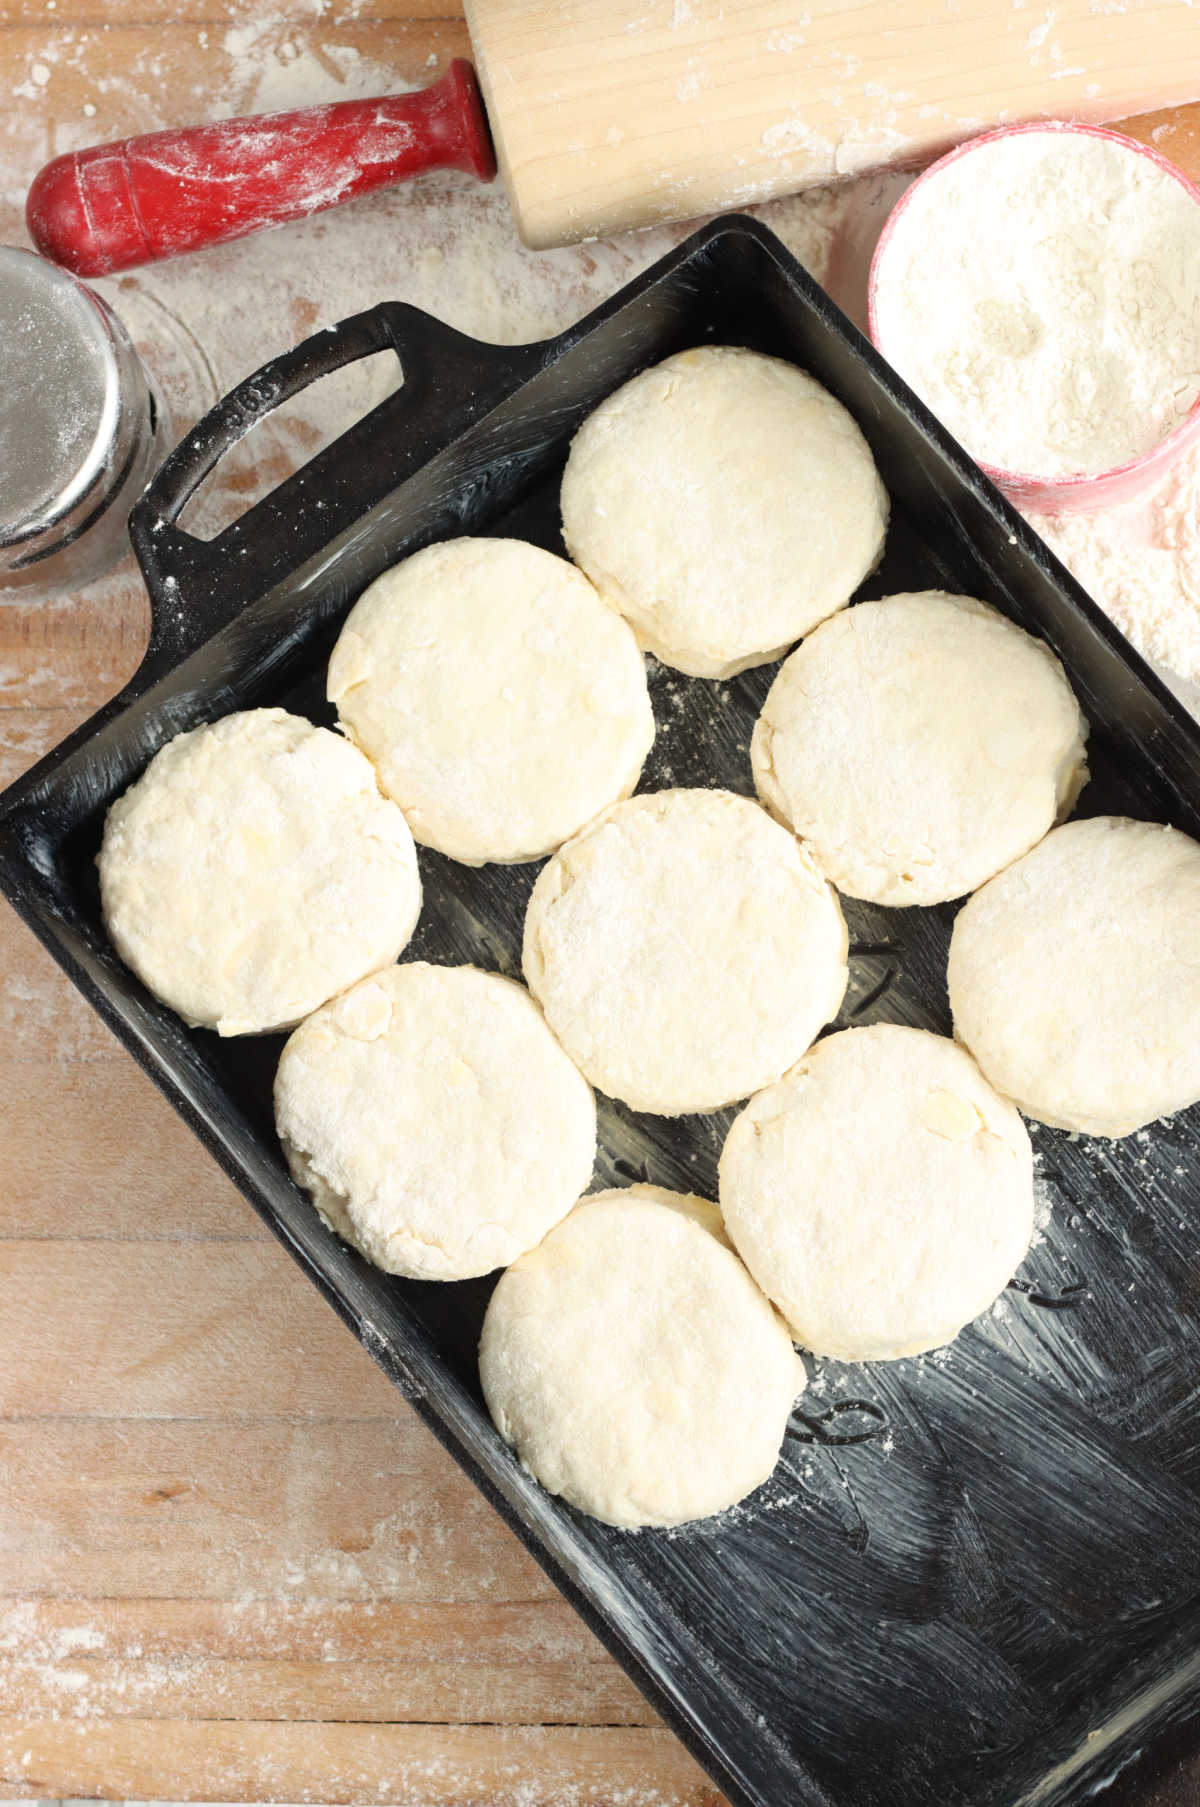 Unbaked biscuits in rectangle cast iron baking pan on butcher block.